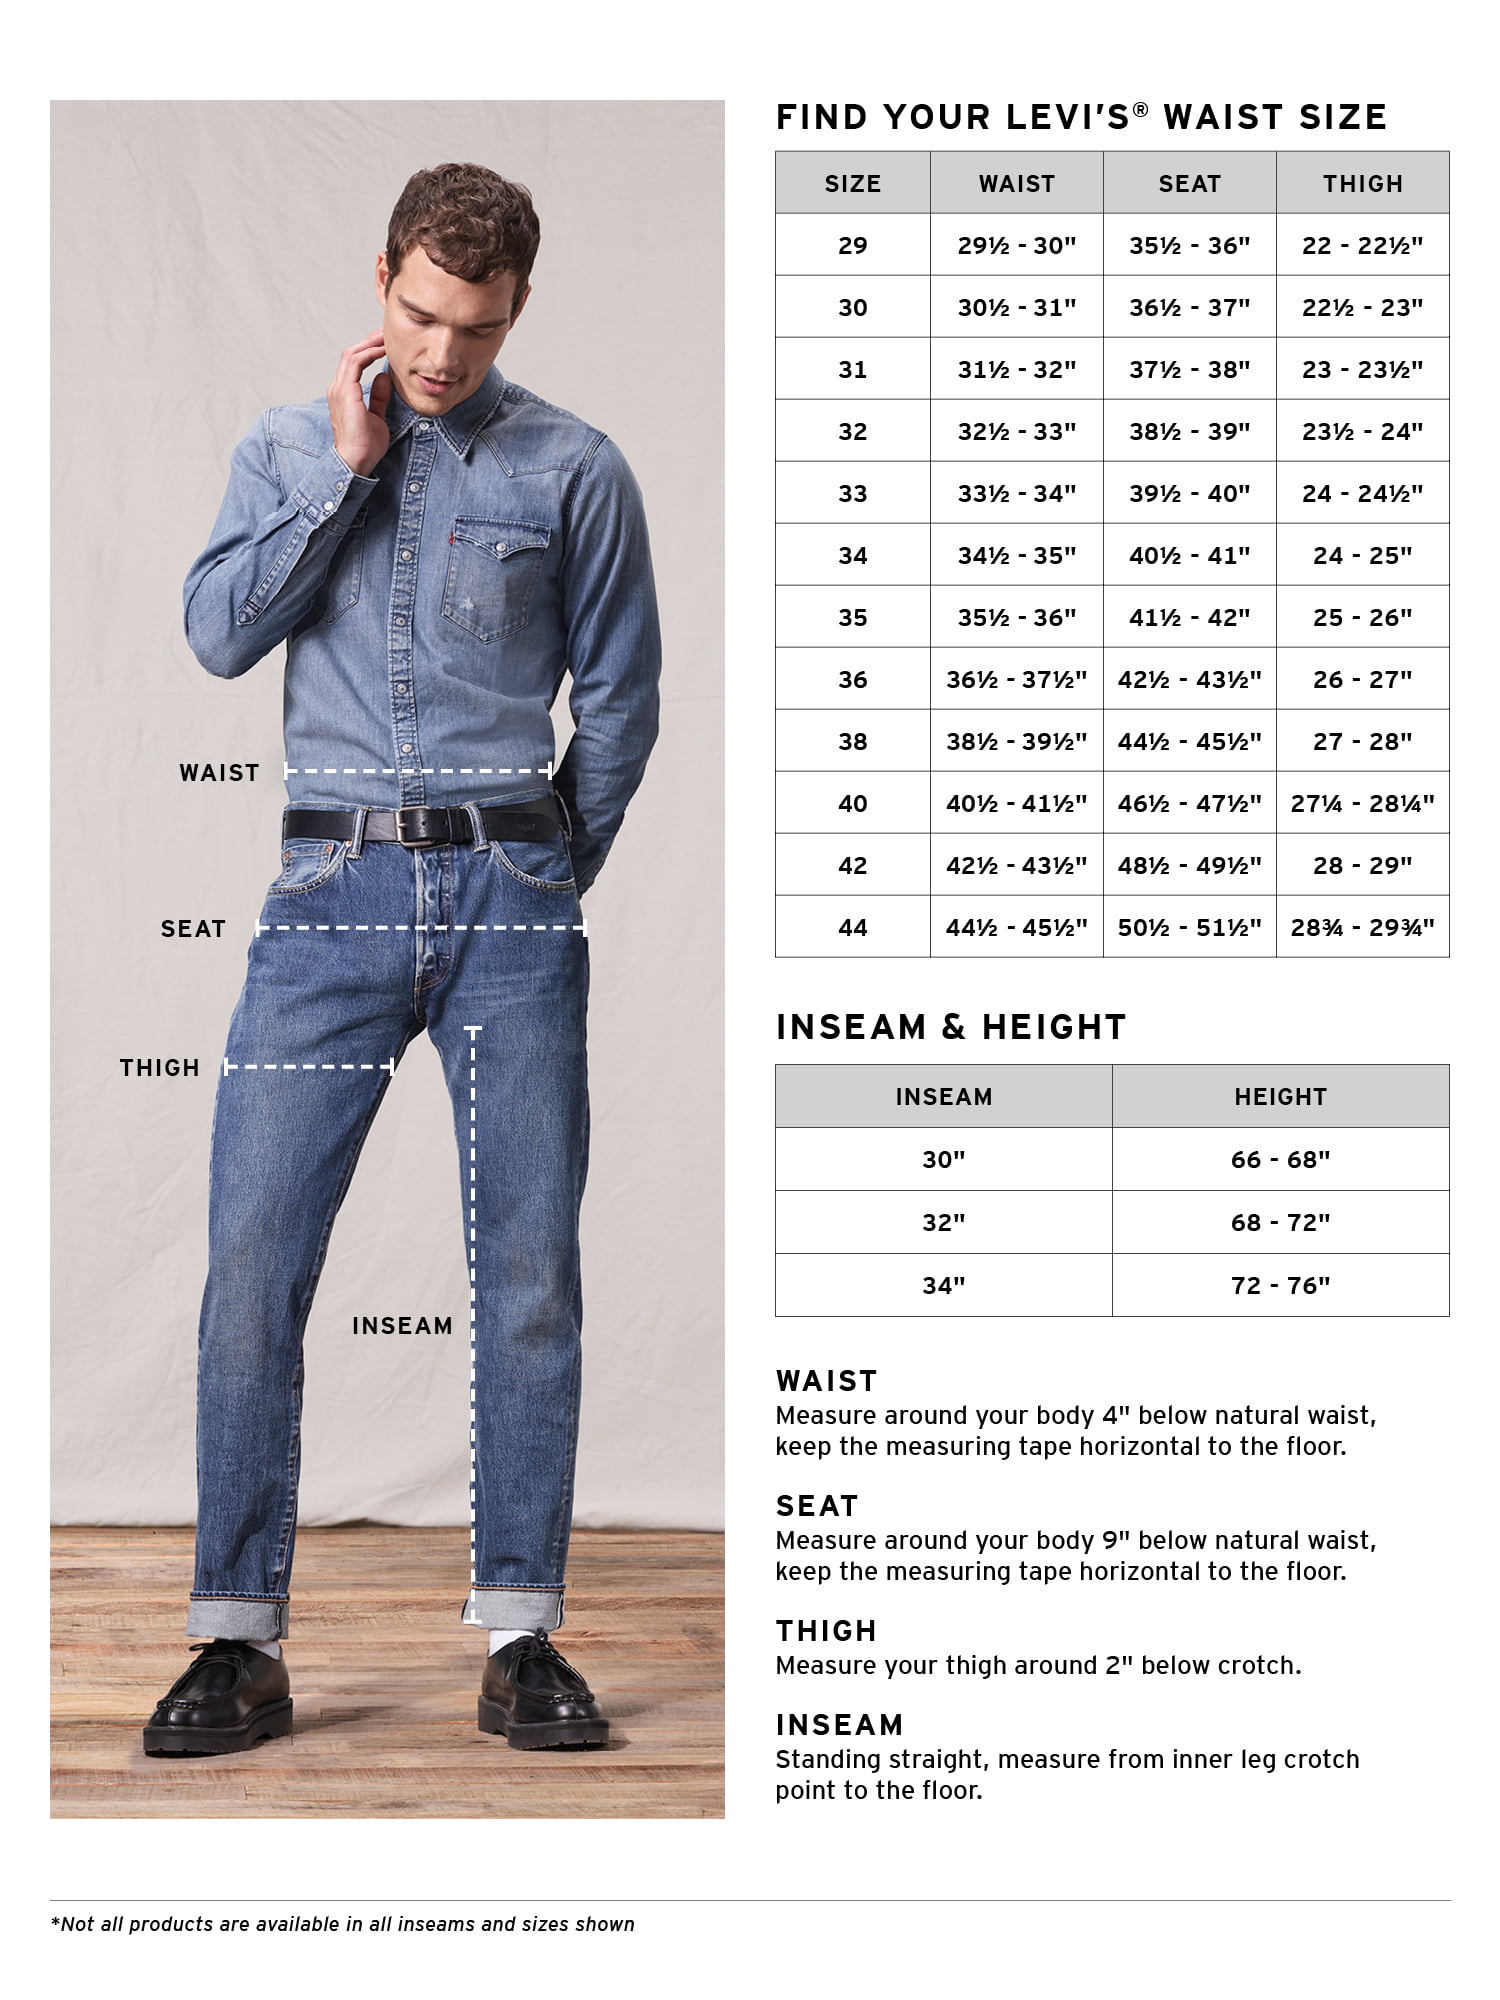 Men's Levi's 550 Relaxed Fit Jeans The Twist 